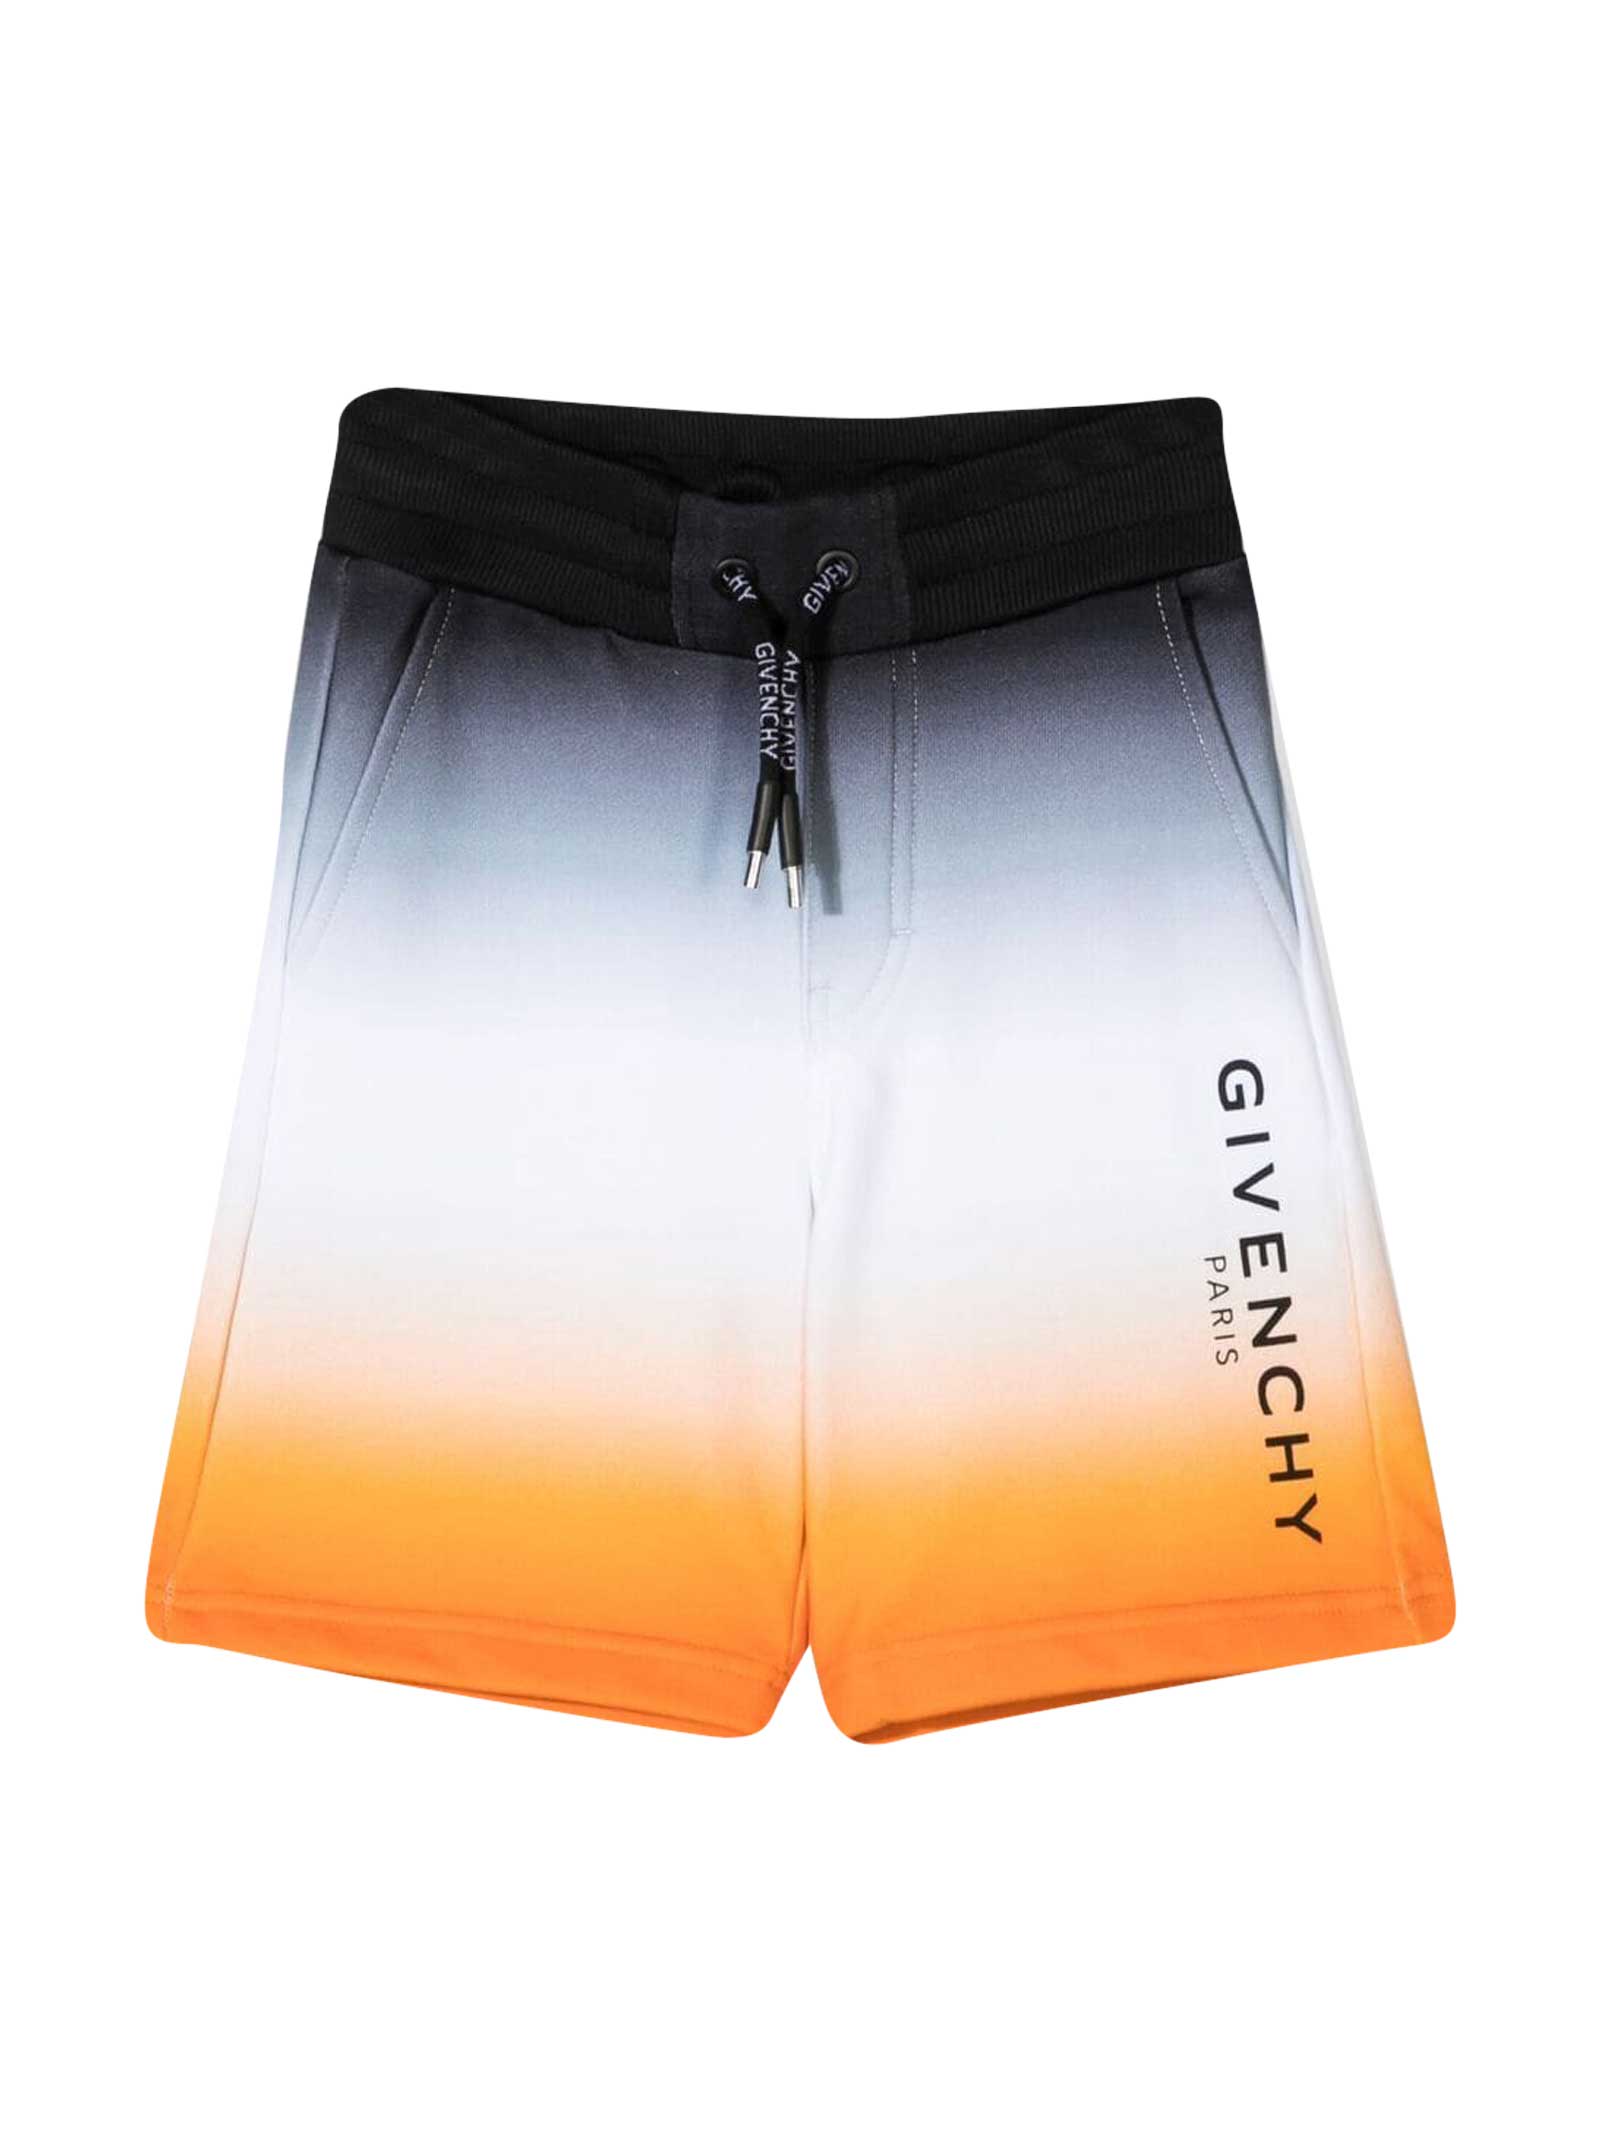 GIVENCHY SHORTS WITH PRESS,H24125 M44